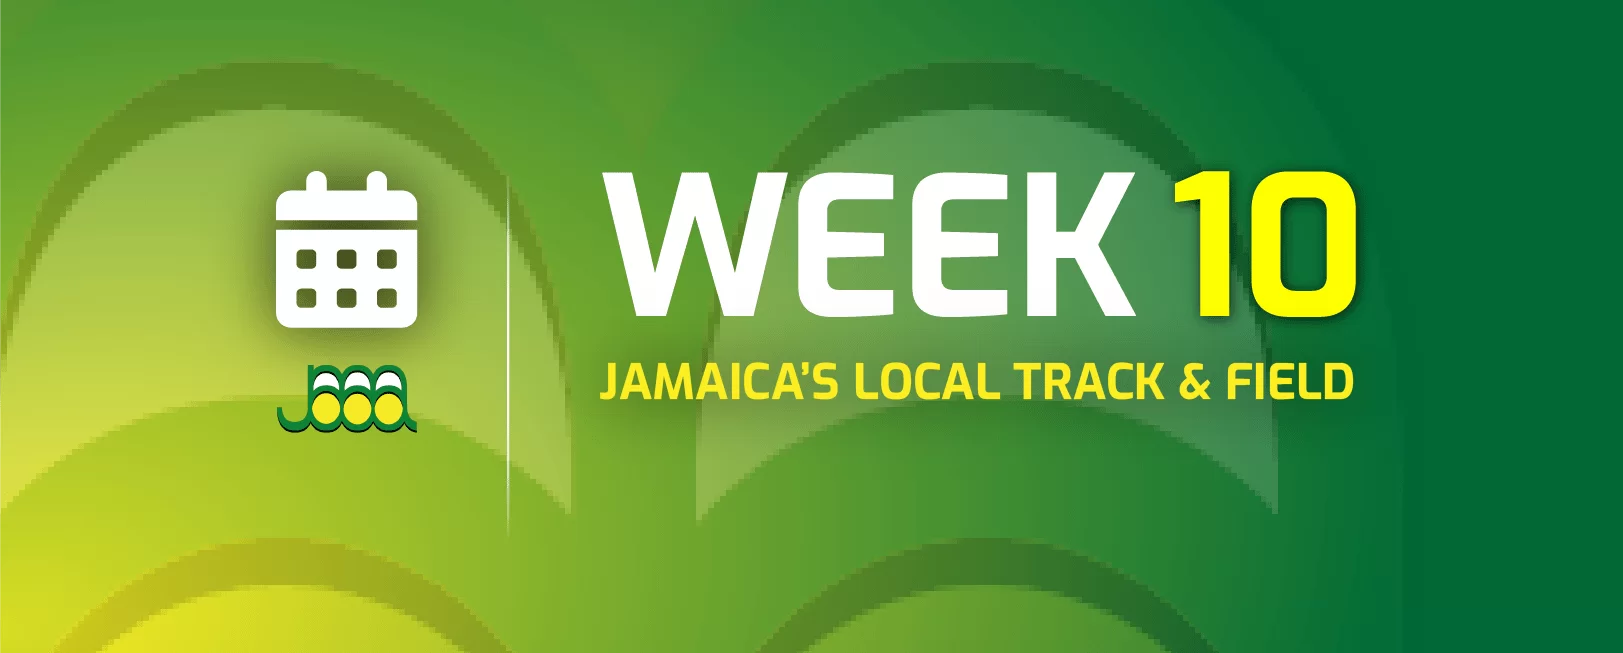 Featured Image for [This Week in Jamaica’s Local Track & Field 2023, Week 10] article